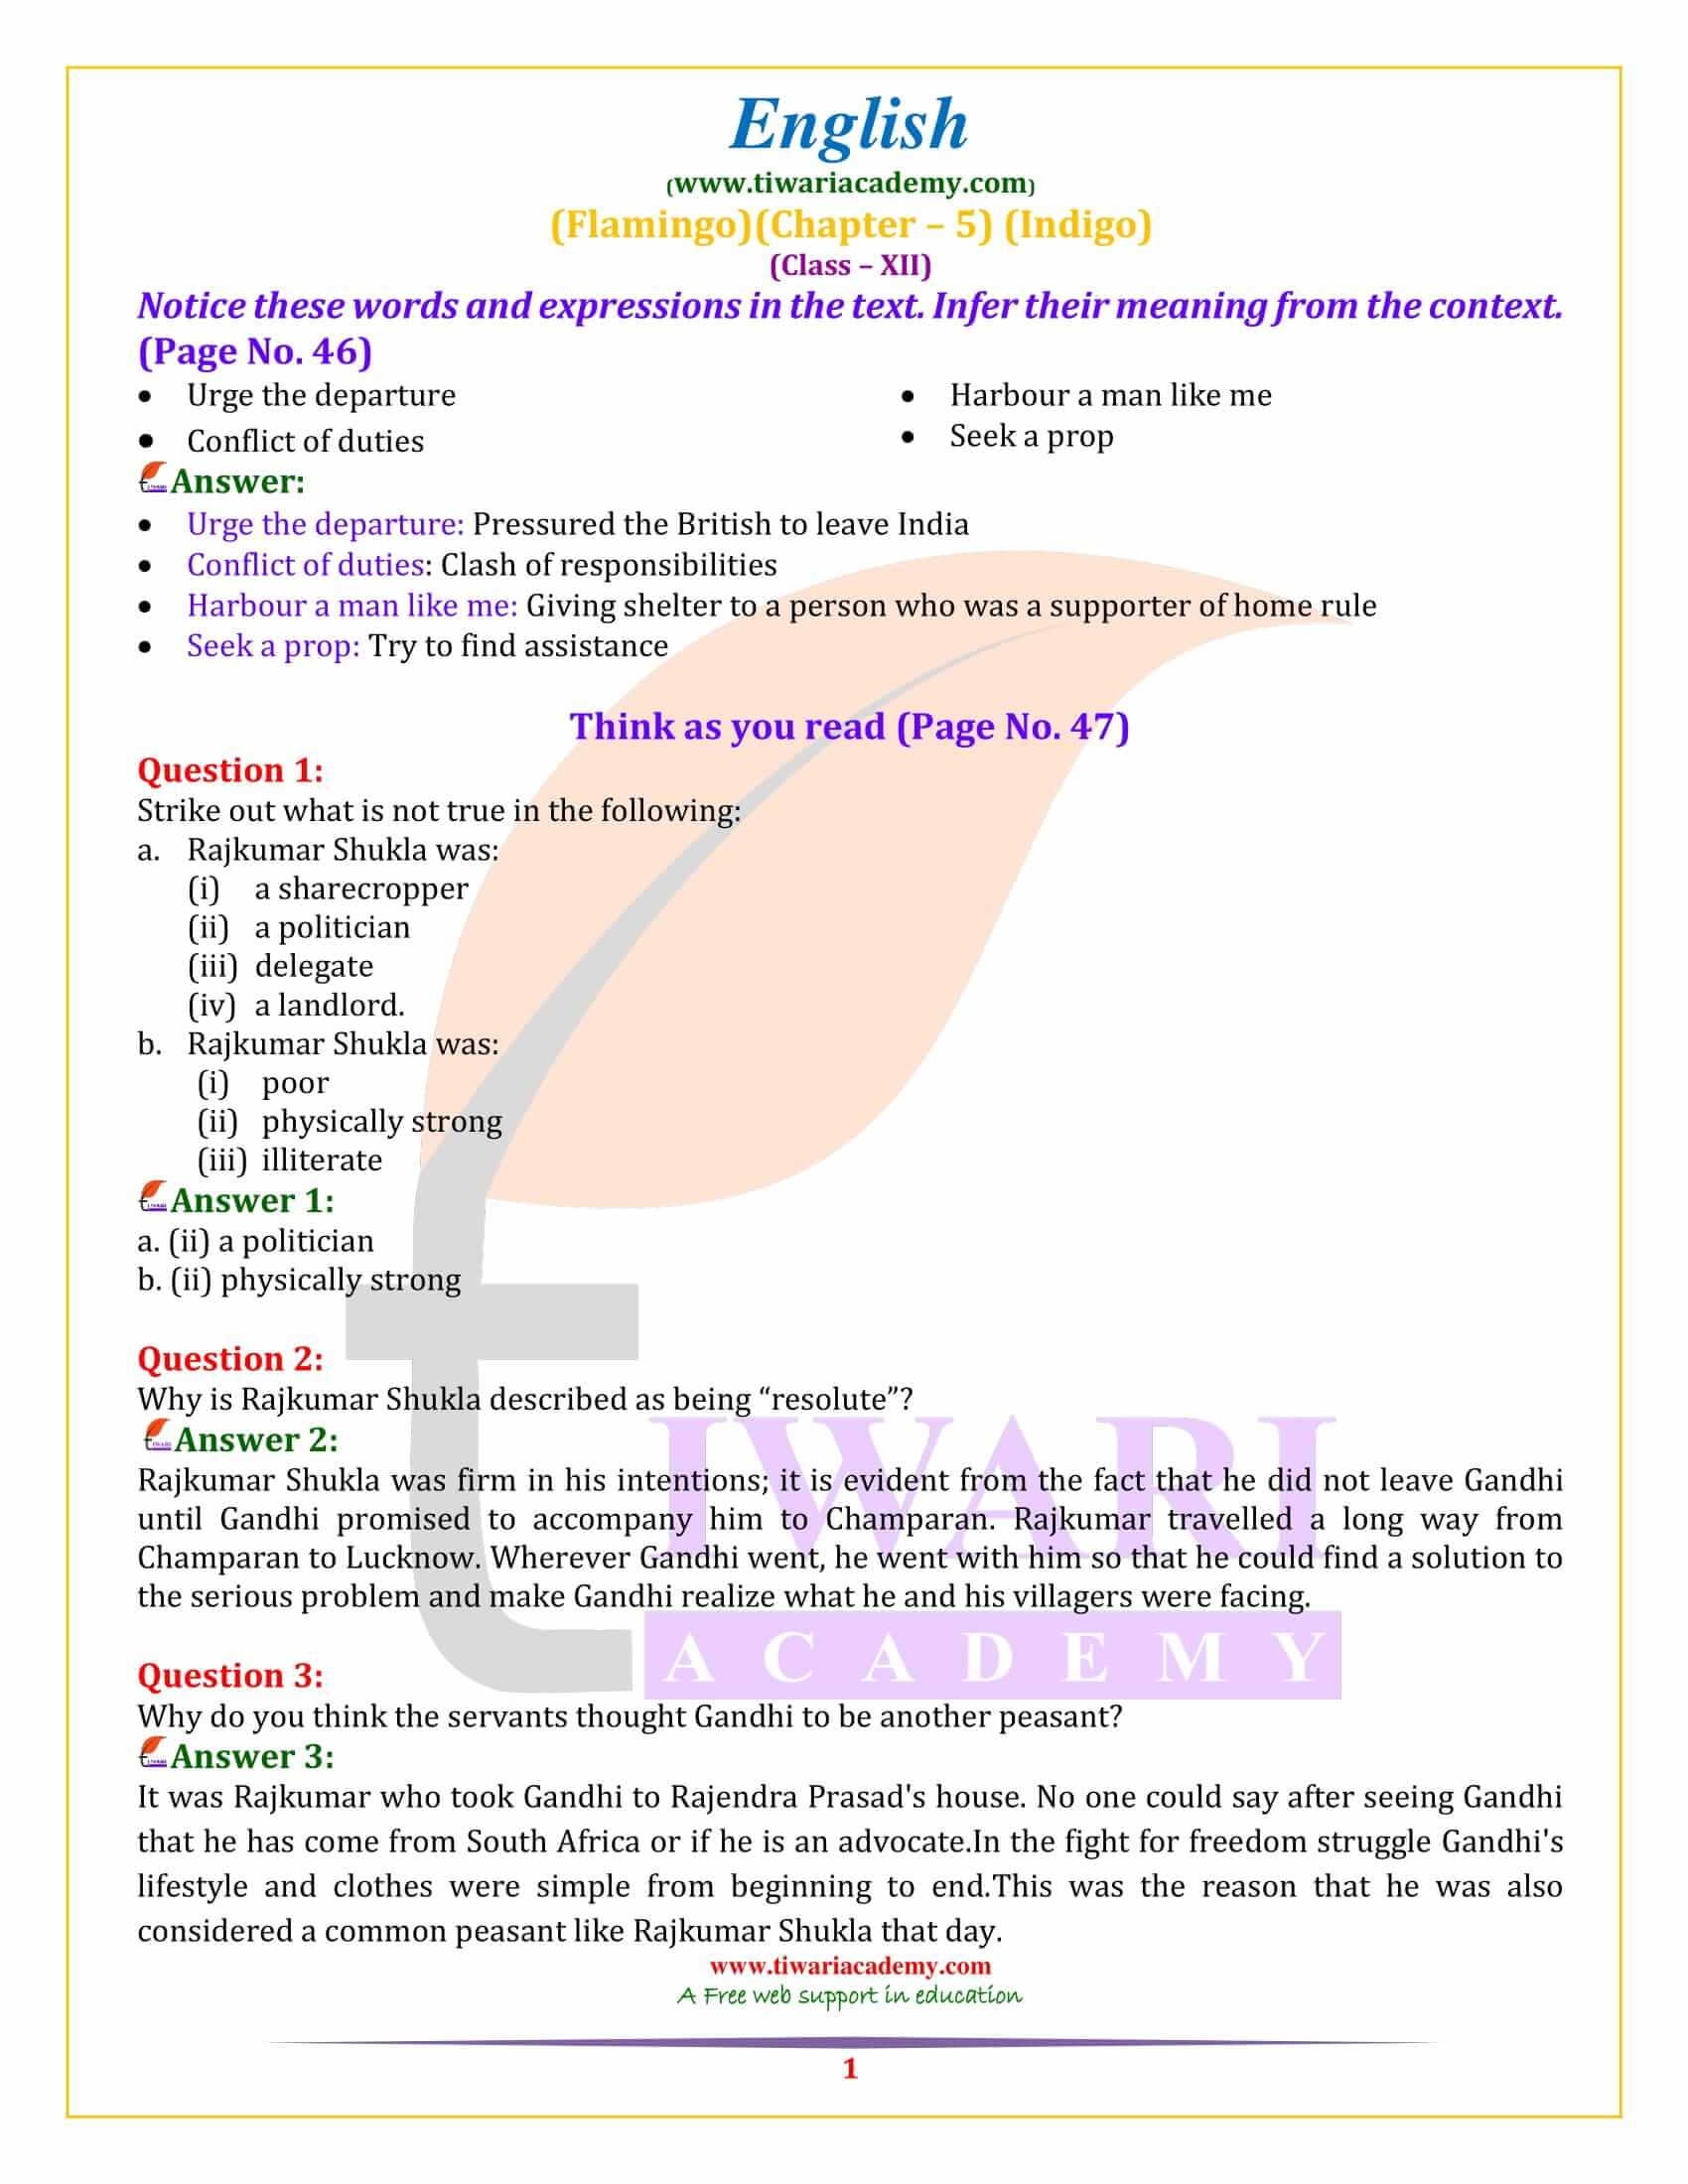 NCERT Solutions for Class 12 English Chapter 5 Indigo